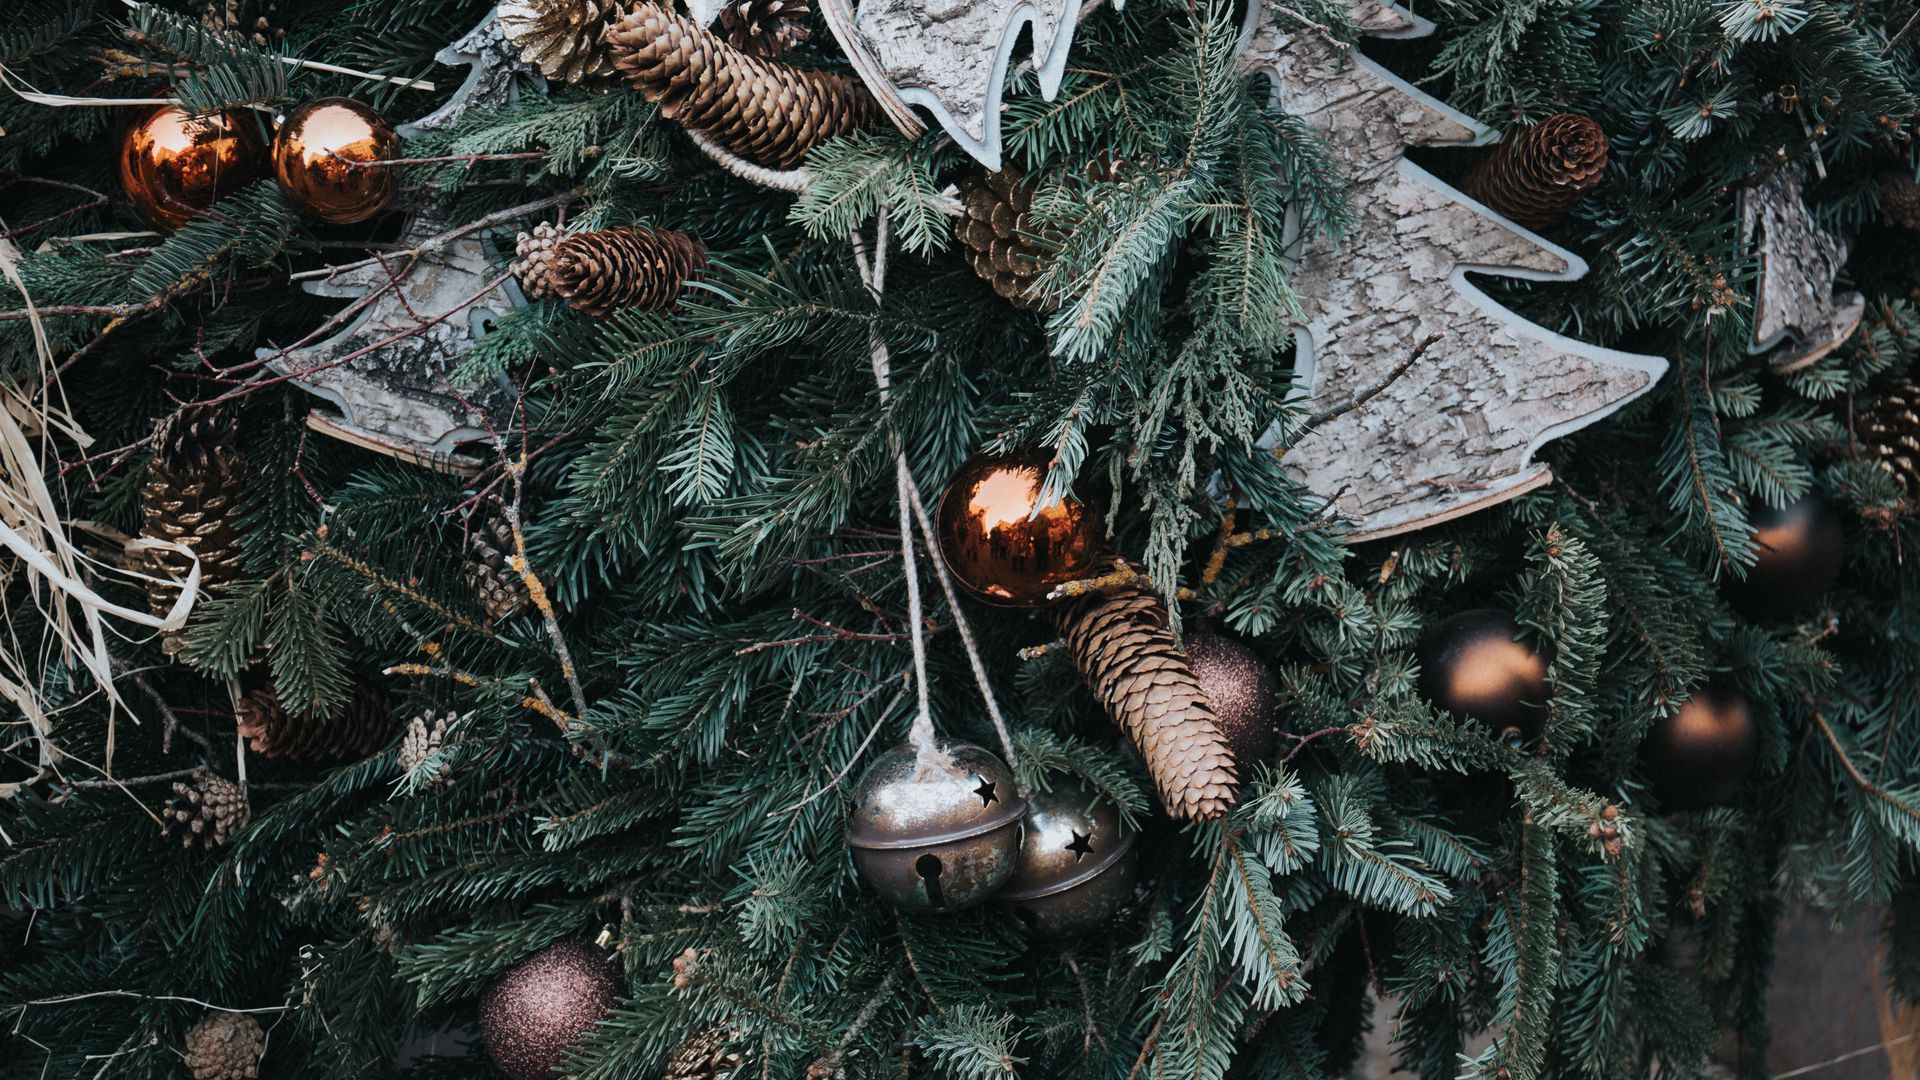 A close up of a Christmas tree with ornaments and pinecones. - New Year